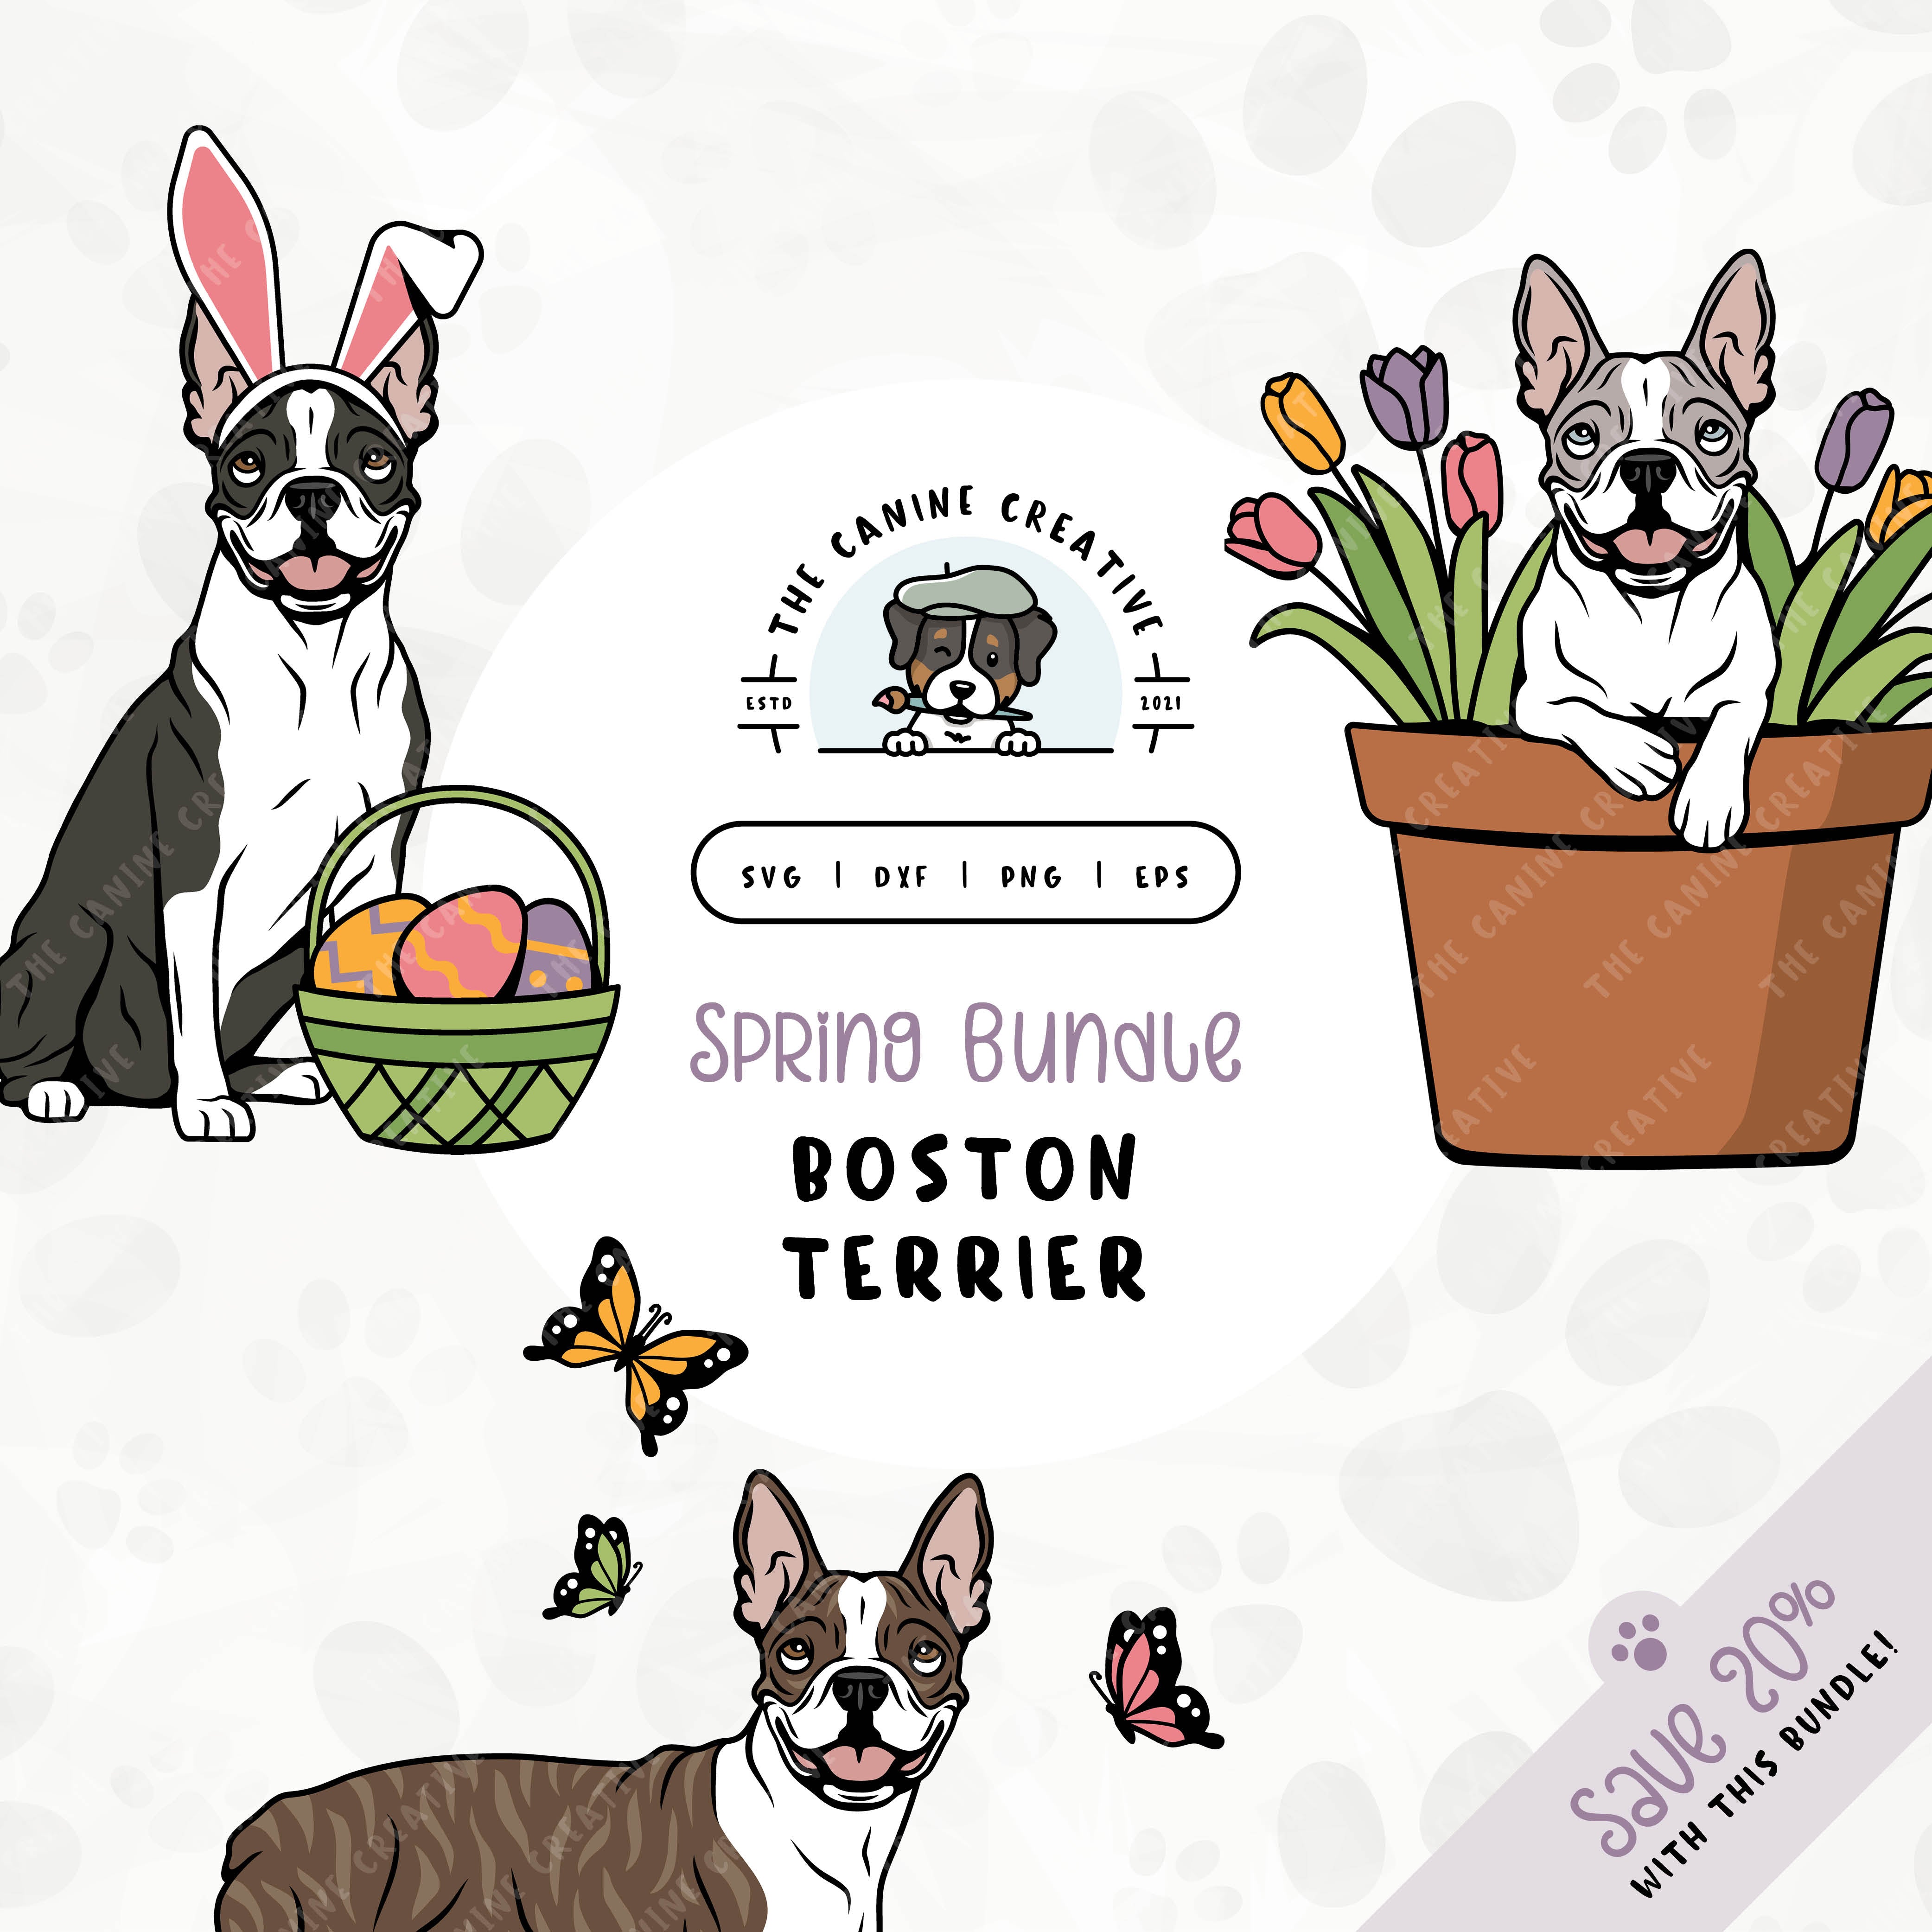 This 3-pack springtime illustration bundle features Boston Terriers among colorful butterflies, peeking out from a pot of vibrant tulips, and wearing festive bunny ears while sitting near a basket of brightly-colored Easter eggs. File formats include: SVG, DXF, PNG, and EPS.